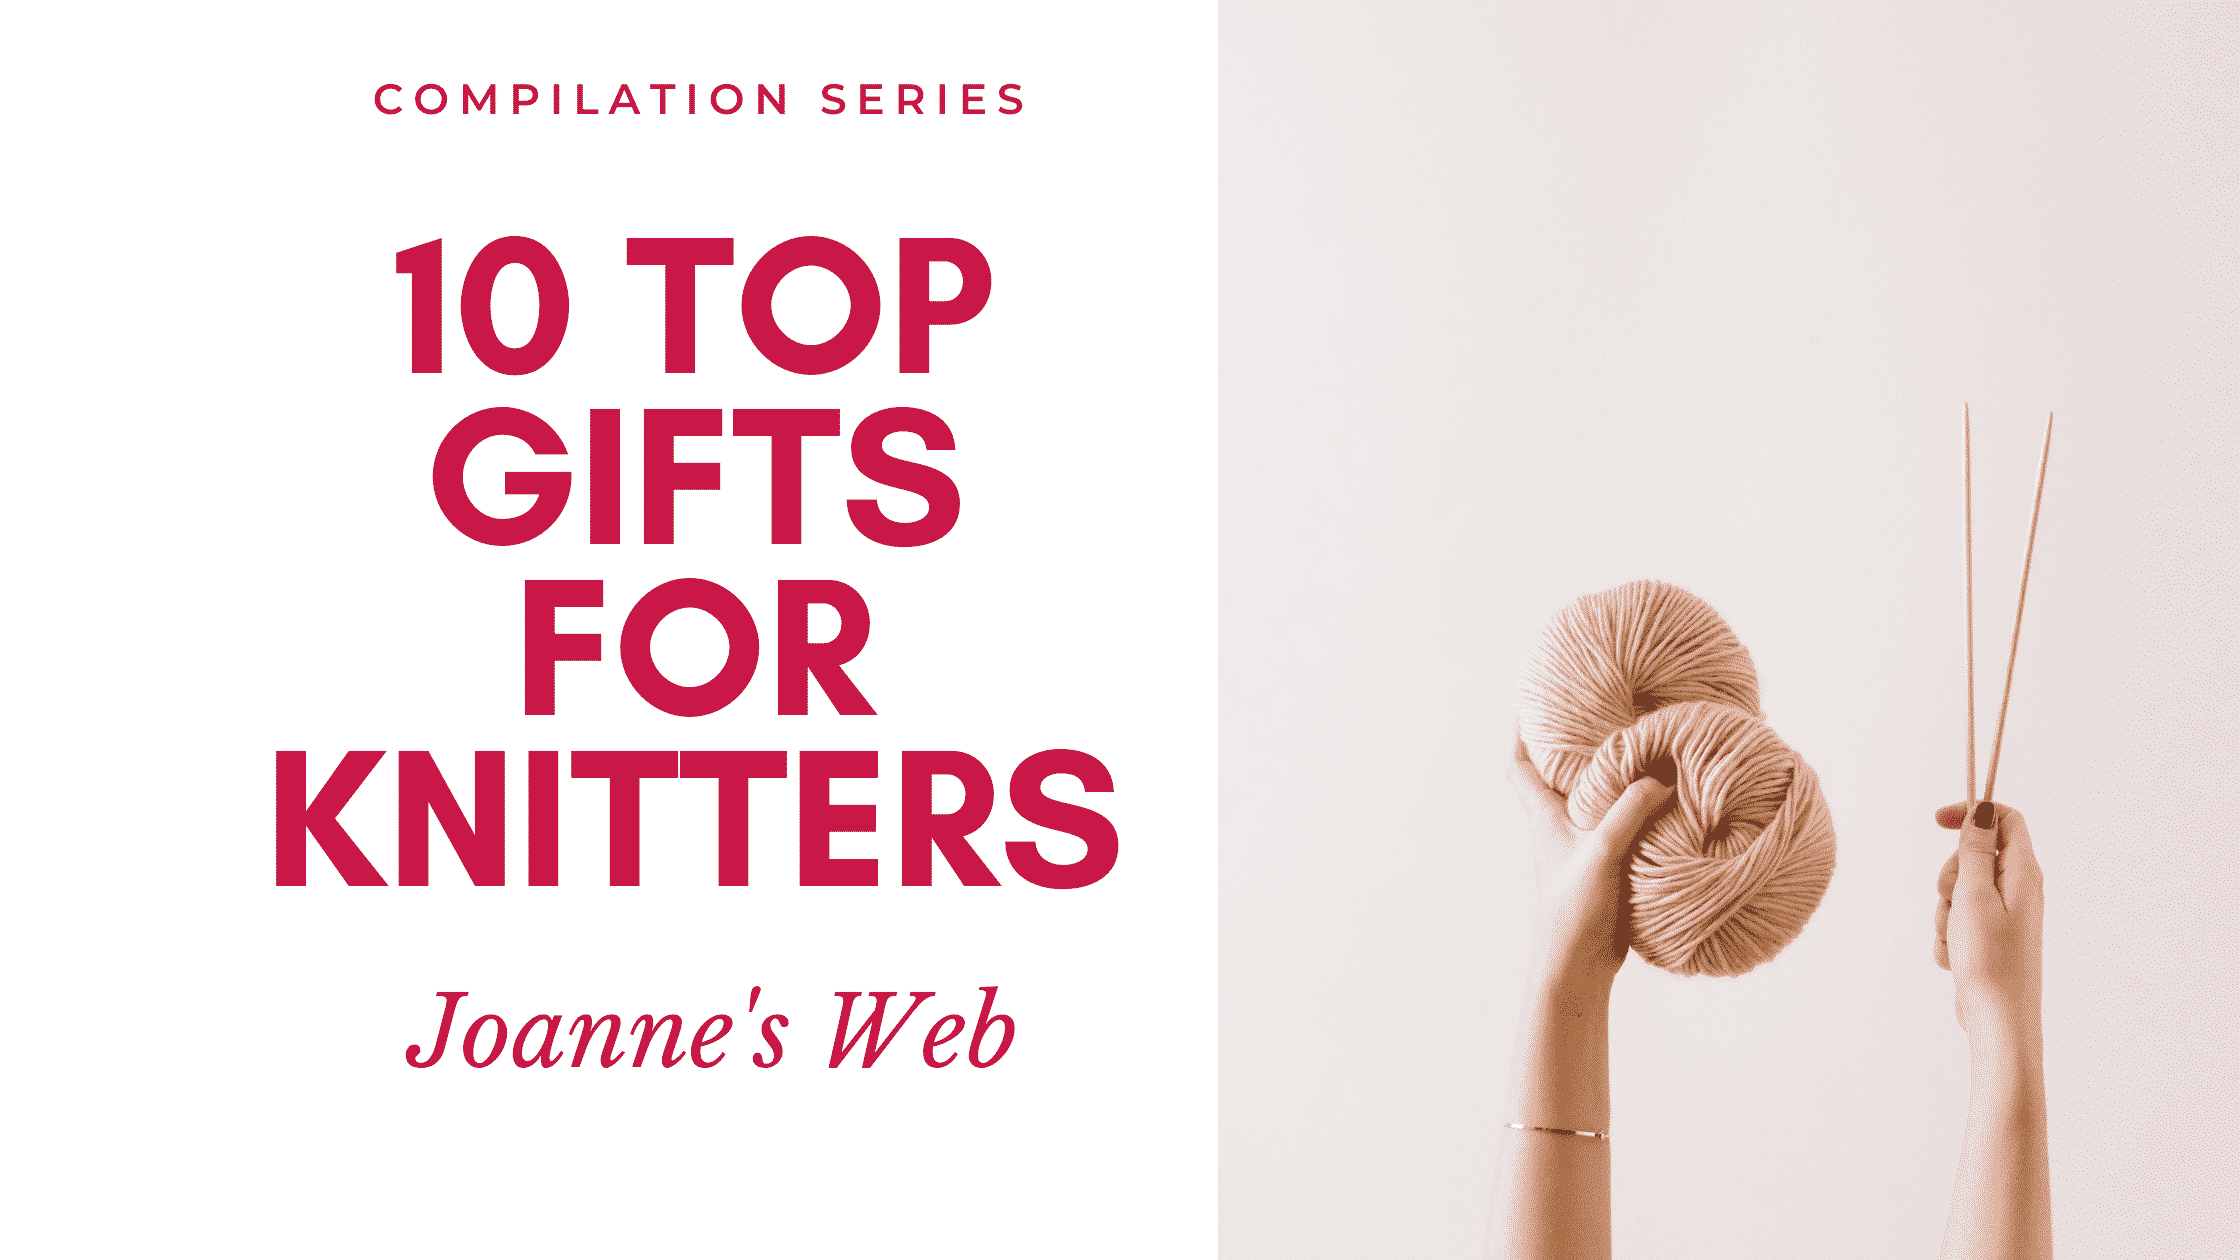 Top 10 gift ideas for knitters